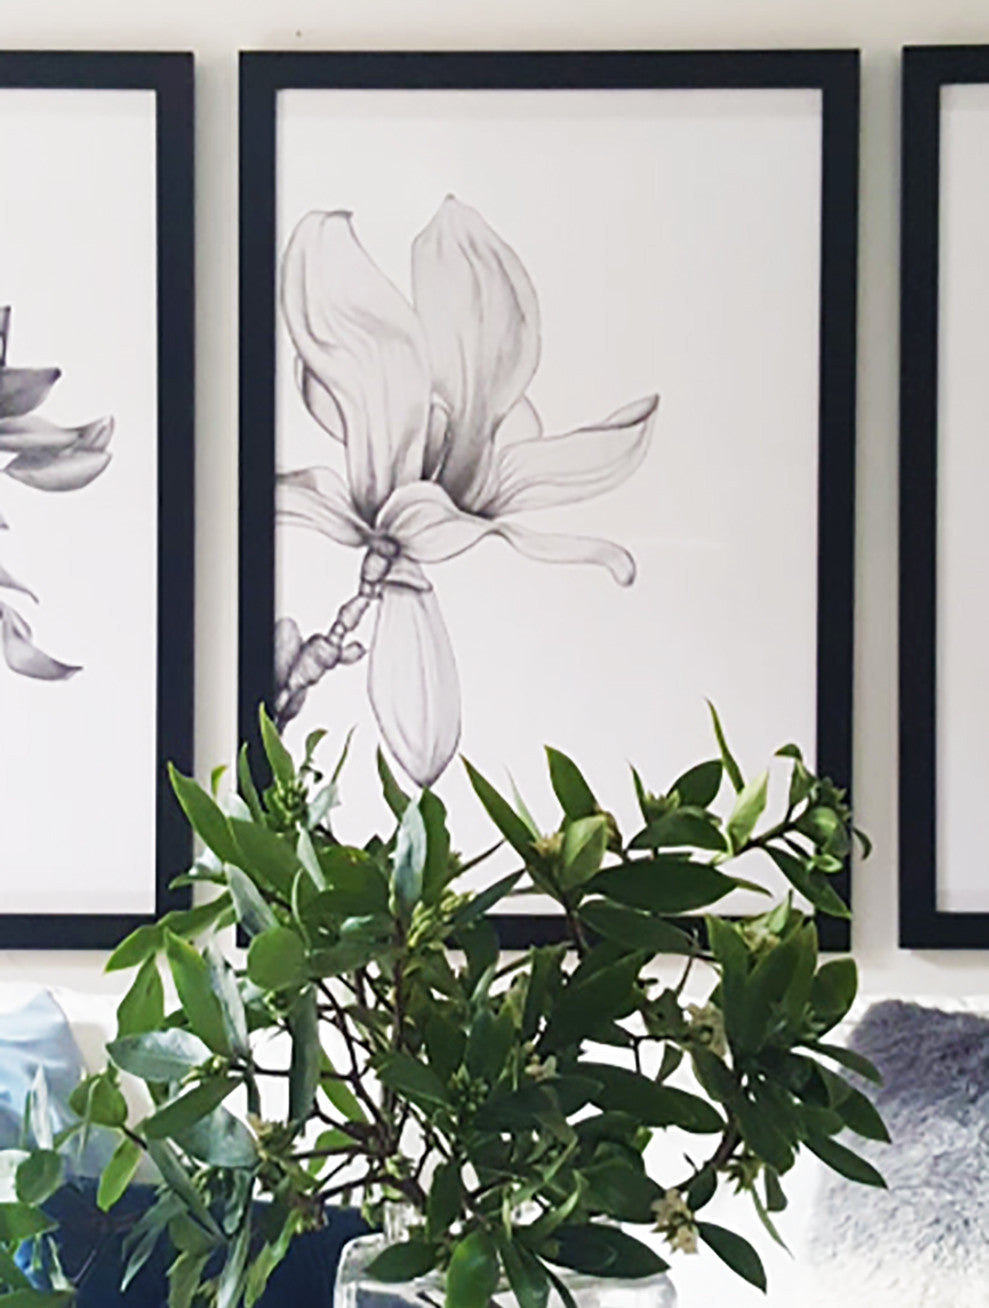 Magnolia illustration, hand drawn using pencil, also comes in a set of 3 with the Protea and Peony